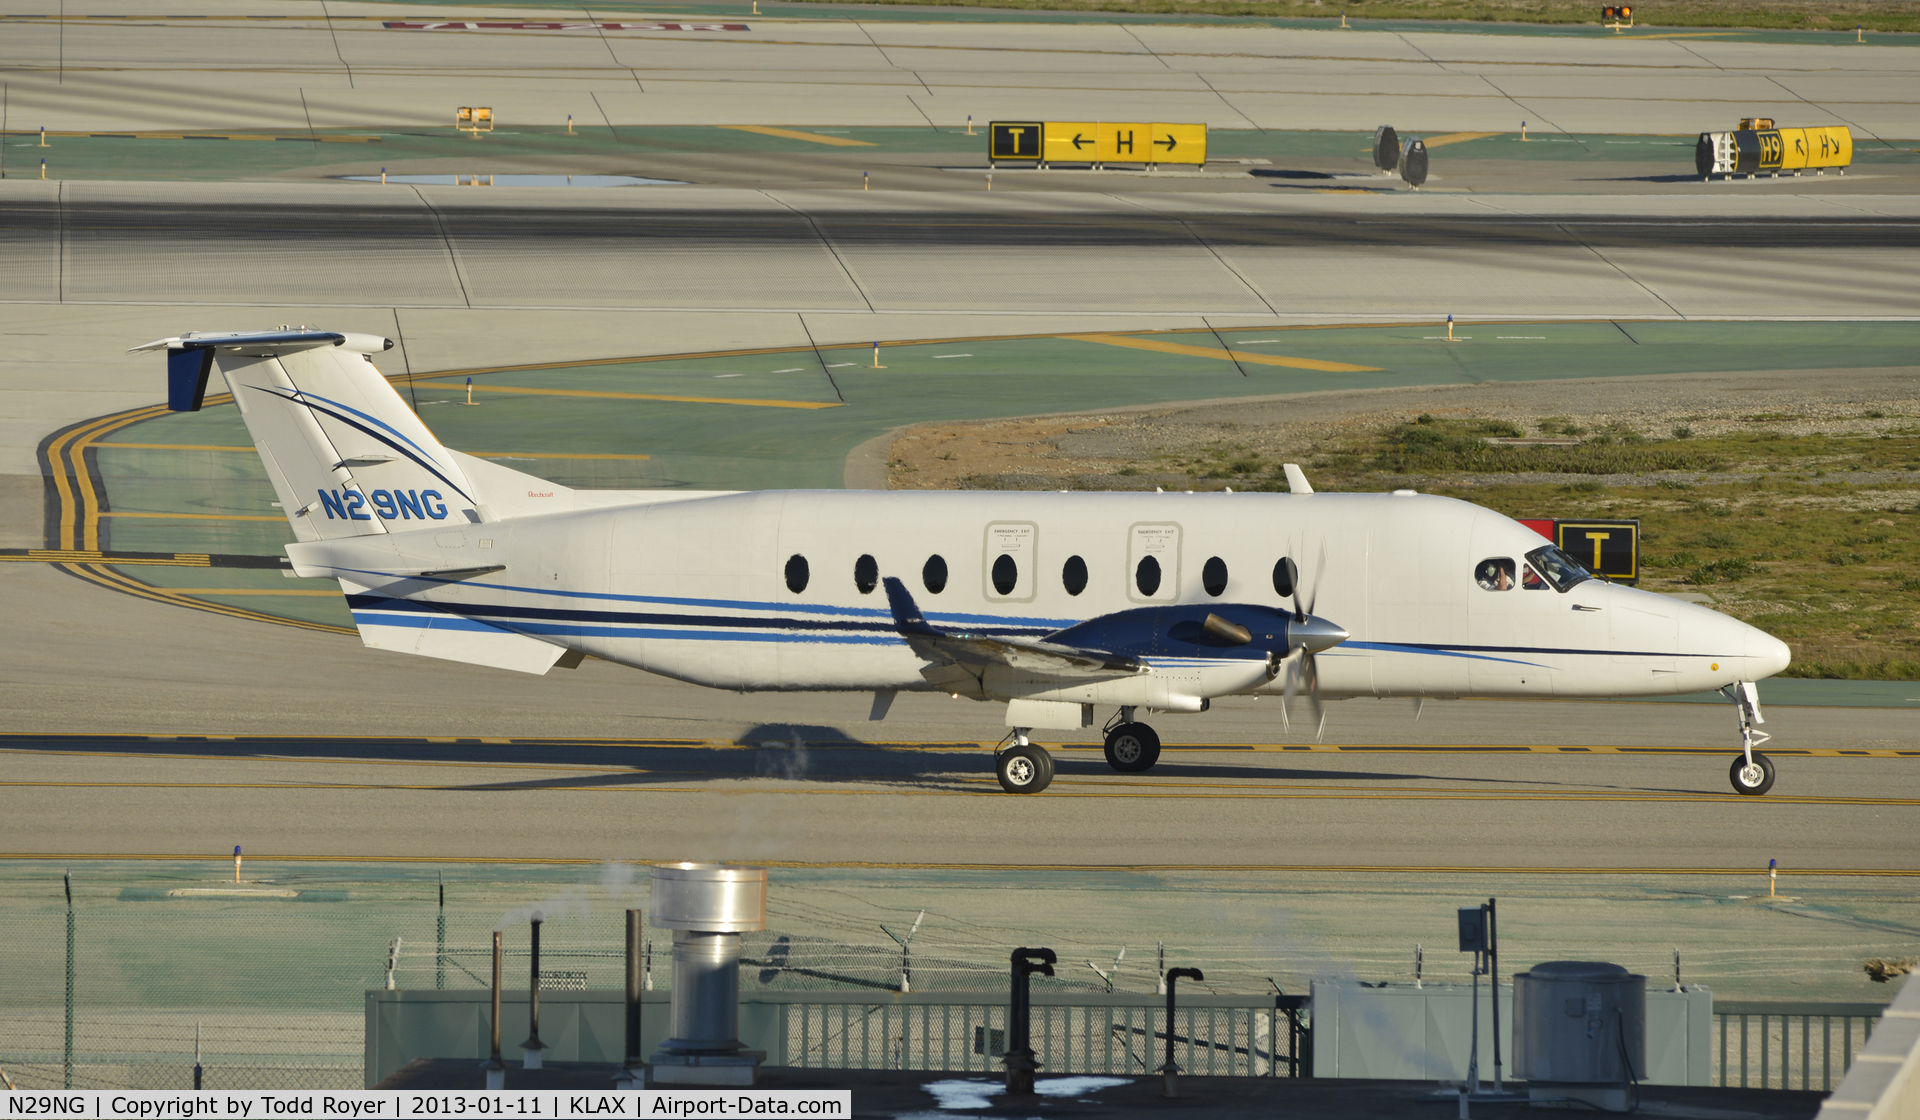 N29NG, 1997 Beech 1900D C/N UE-303, Taxiing to parking at LAX